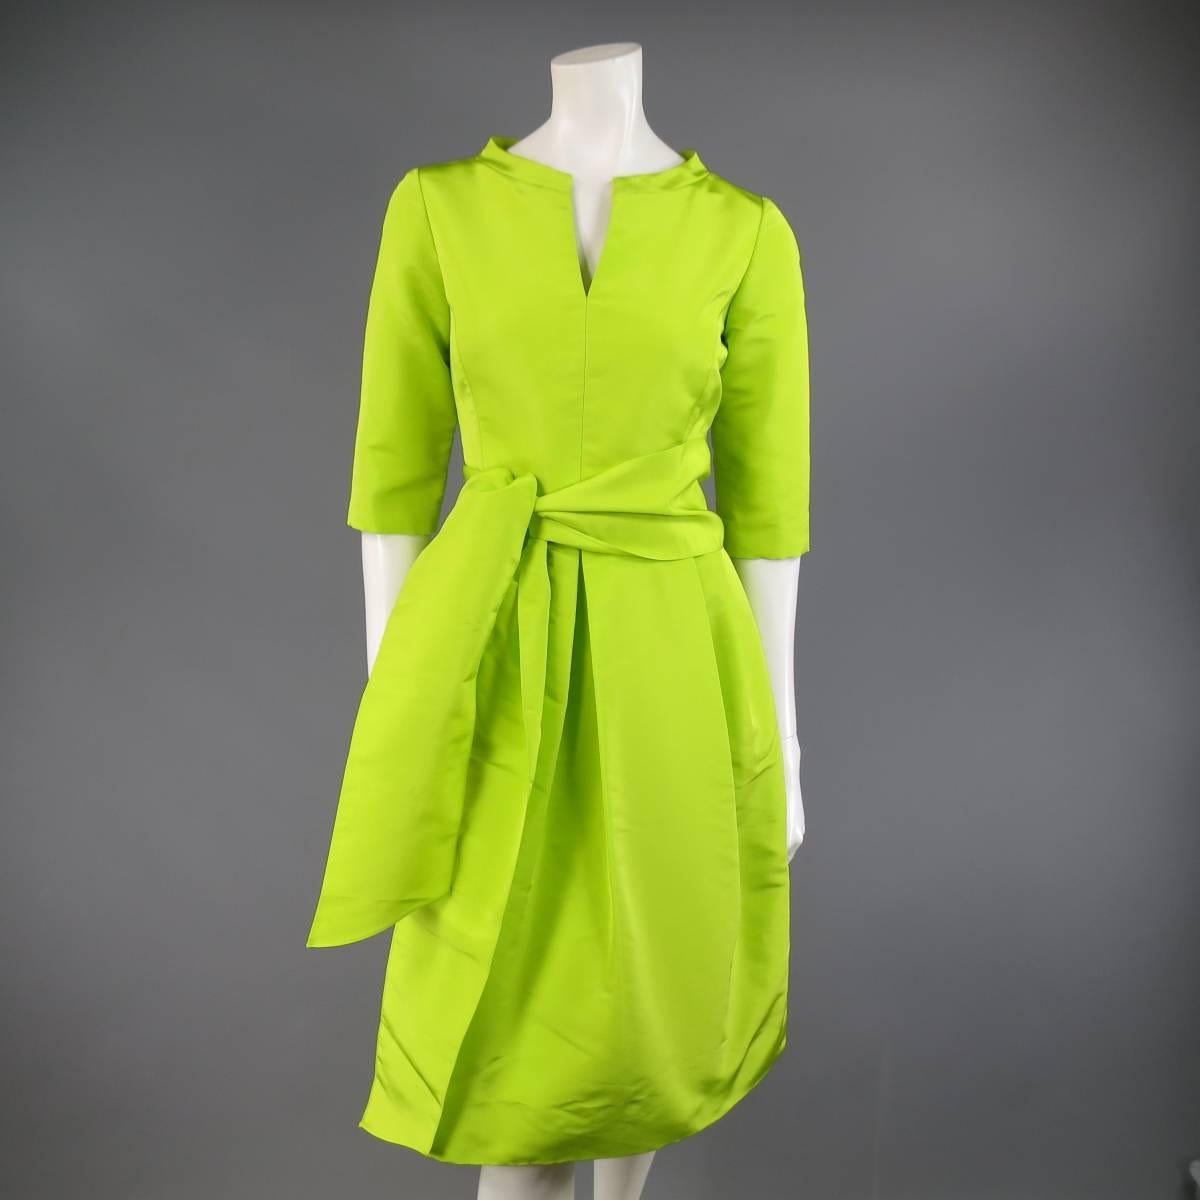 This fabulous LEE ANDERSON COUTURE cocktail dress comes in a bold lime green silk taffeta faille and features a scoop neck line with slit, three quarter sleeves, pleated A line skirt with slit pockets, and matching thick sash.
 
Excellent